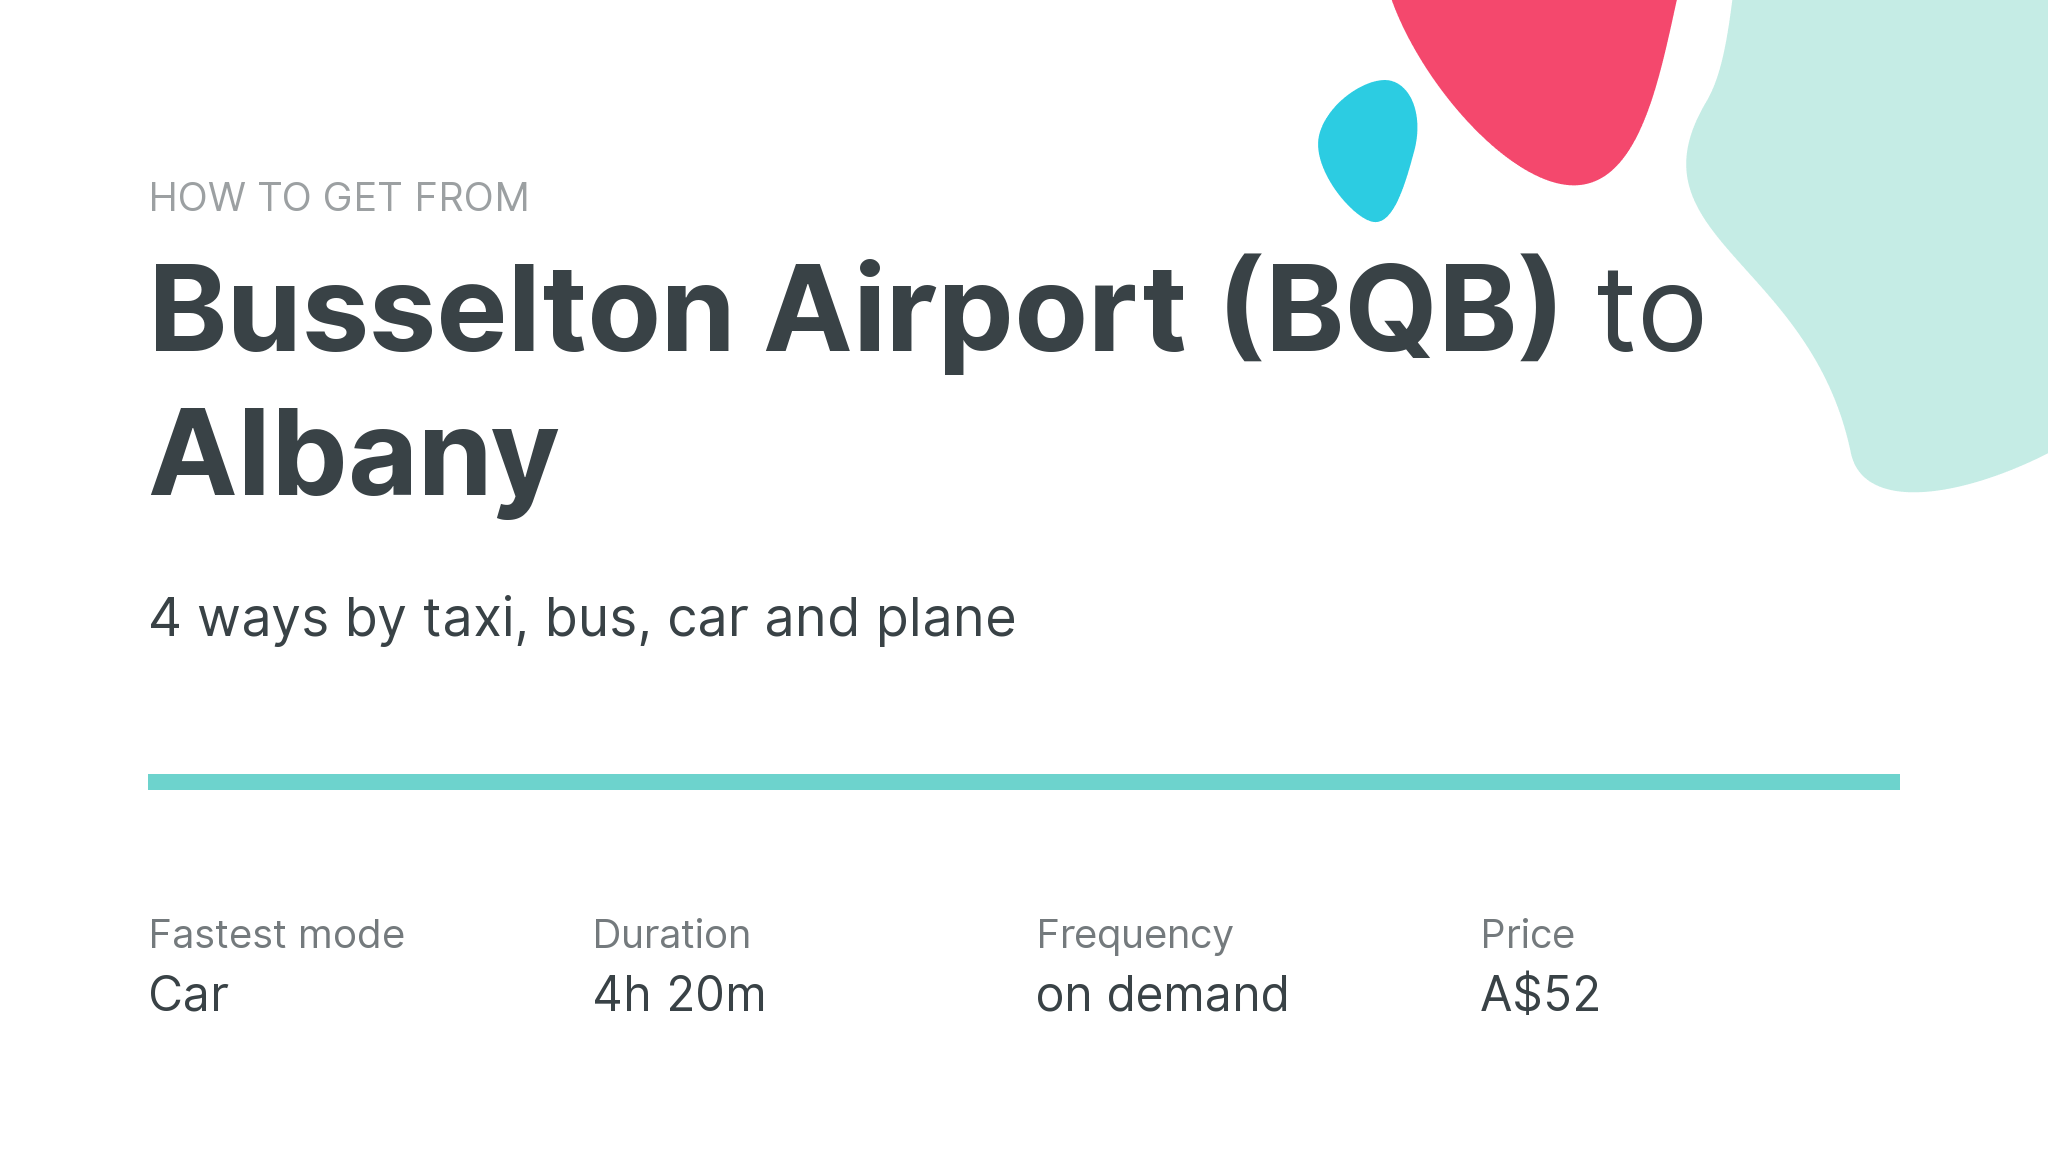 How do I get from Busselton Airport (BQB) to Albany